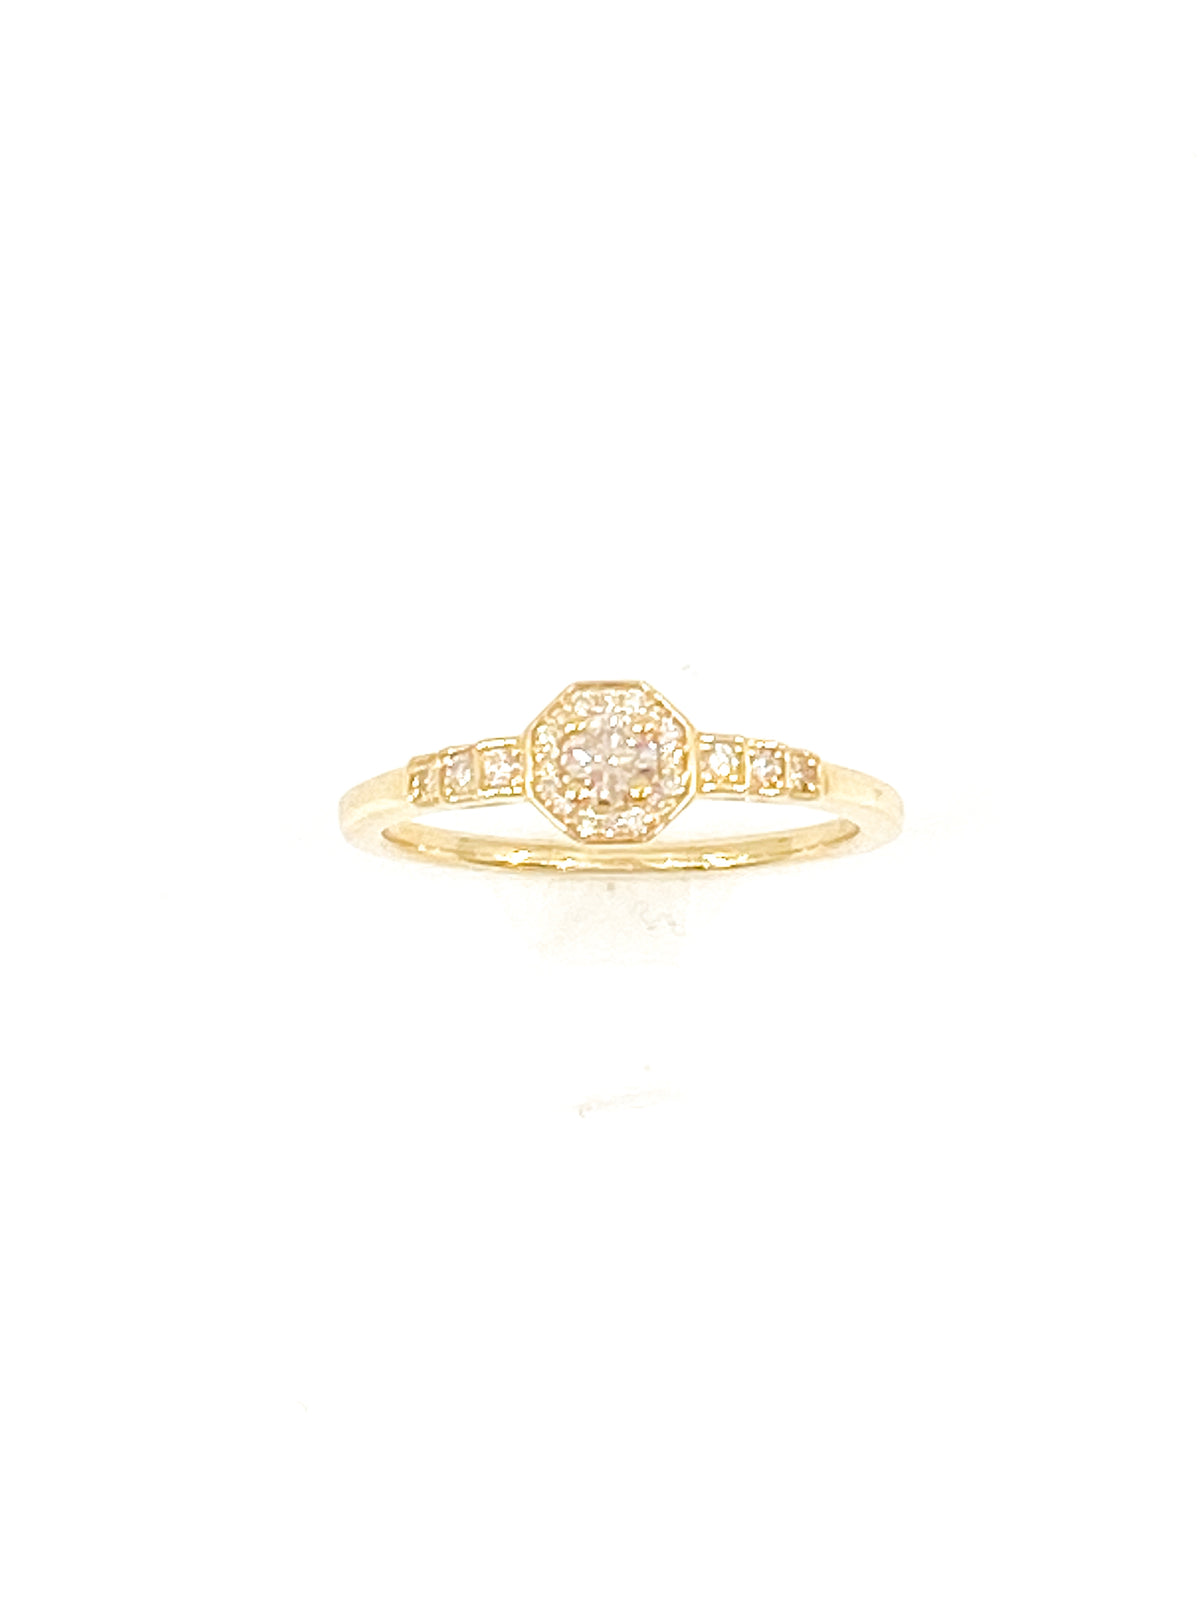 10K Yellow Gold 0.40cttw Canadian Diamond  Halo Engagement Ring, size 6.5